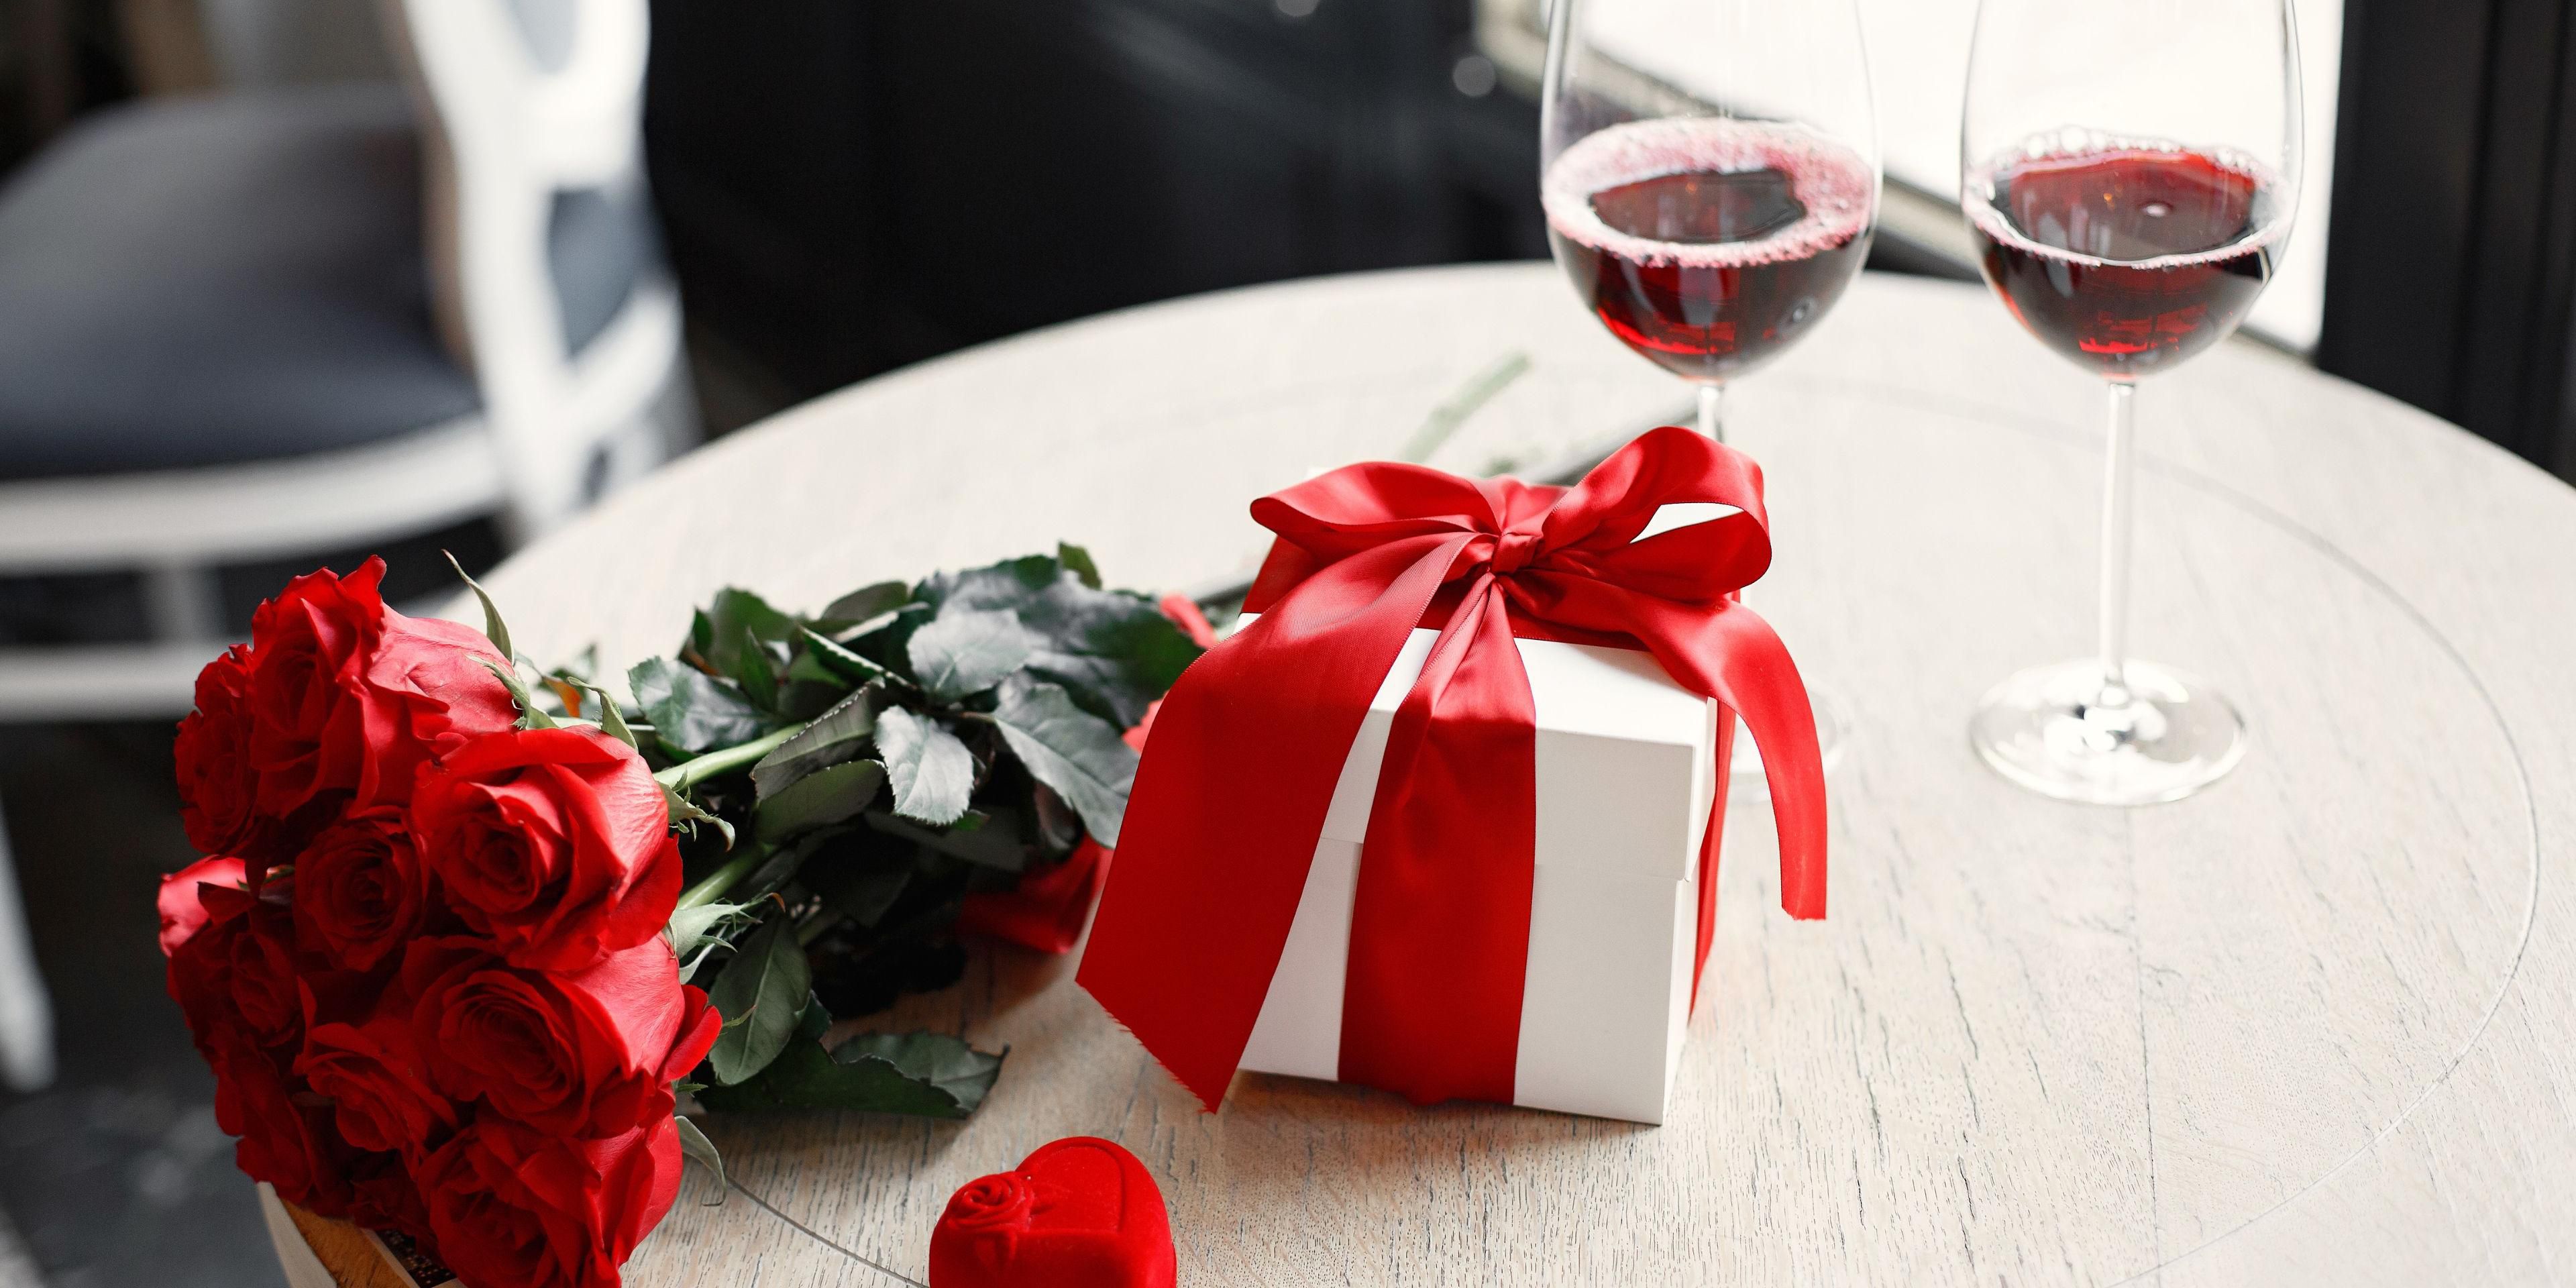 Indulge in the Valentine's Day spirit with our exclusive Romance Package at our hotel, featuring delectable wine and irresistible chocolates. Call us today to book your Romance Package. 